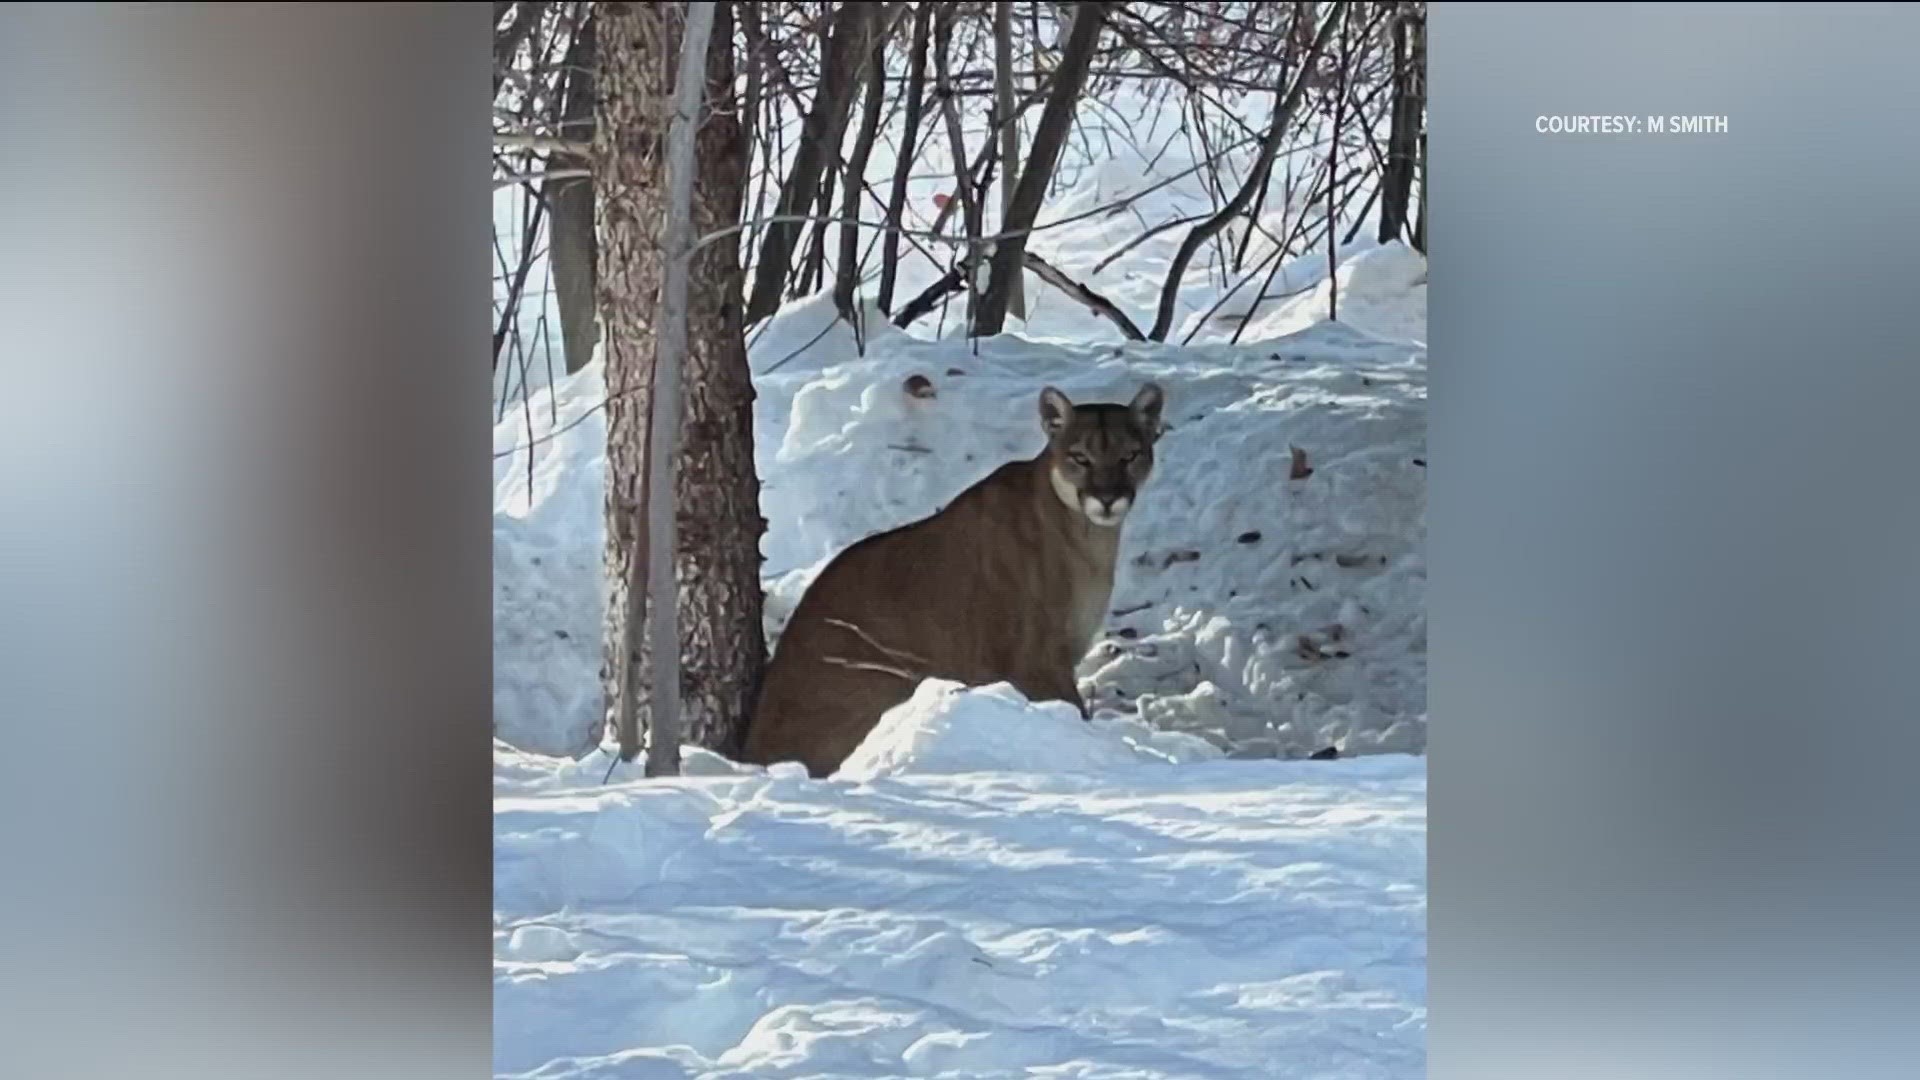 Idaho Fish & Game announced live traps have been set in Hailey to remove mountain lions. Officials have received 85 lion reports since the start of October 2022.